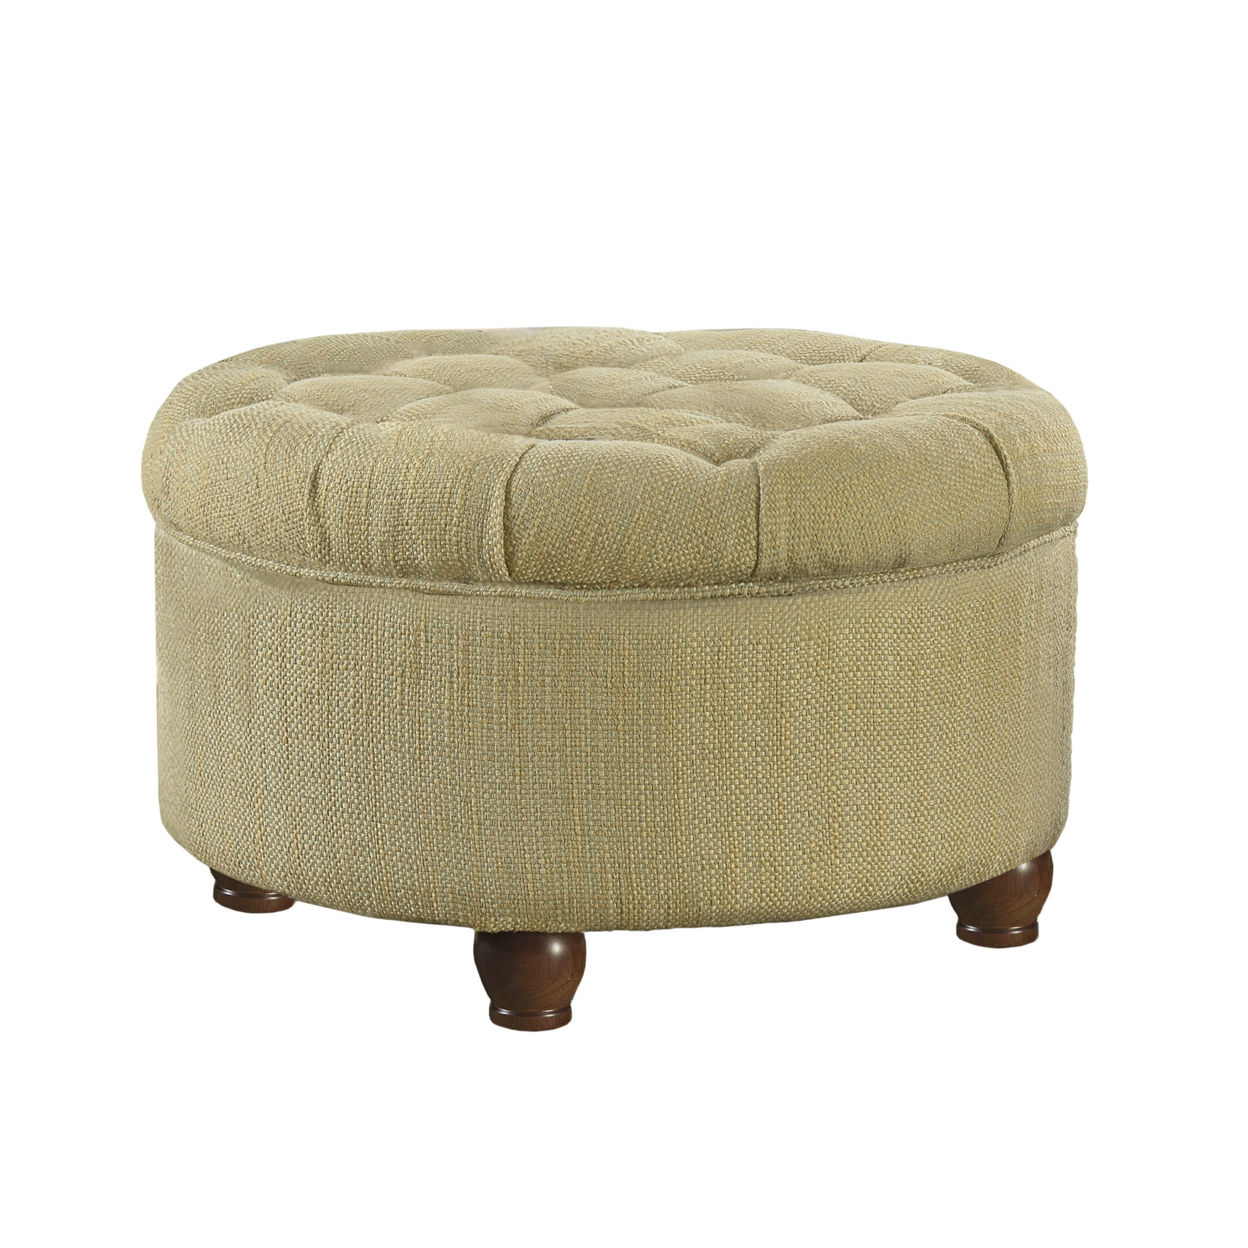 Fabric Upholstered Wooden Ottoman With Tufted Lift Off Lid Storage, Beige And Brown- Saltoro Sherpi